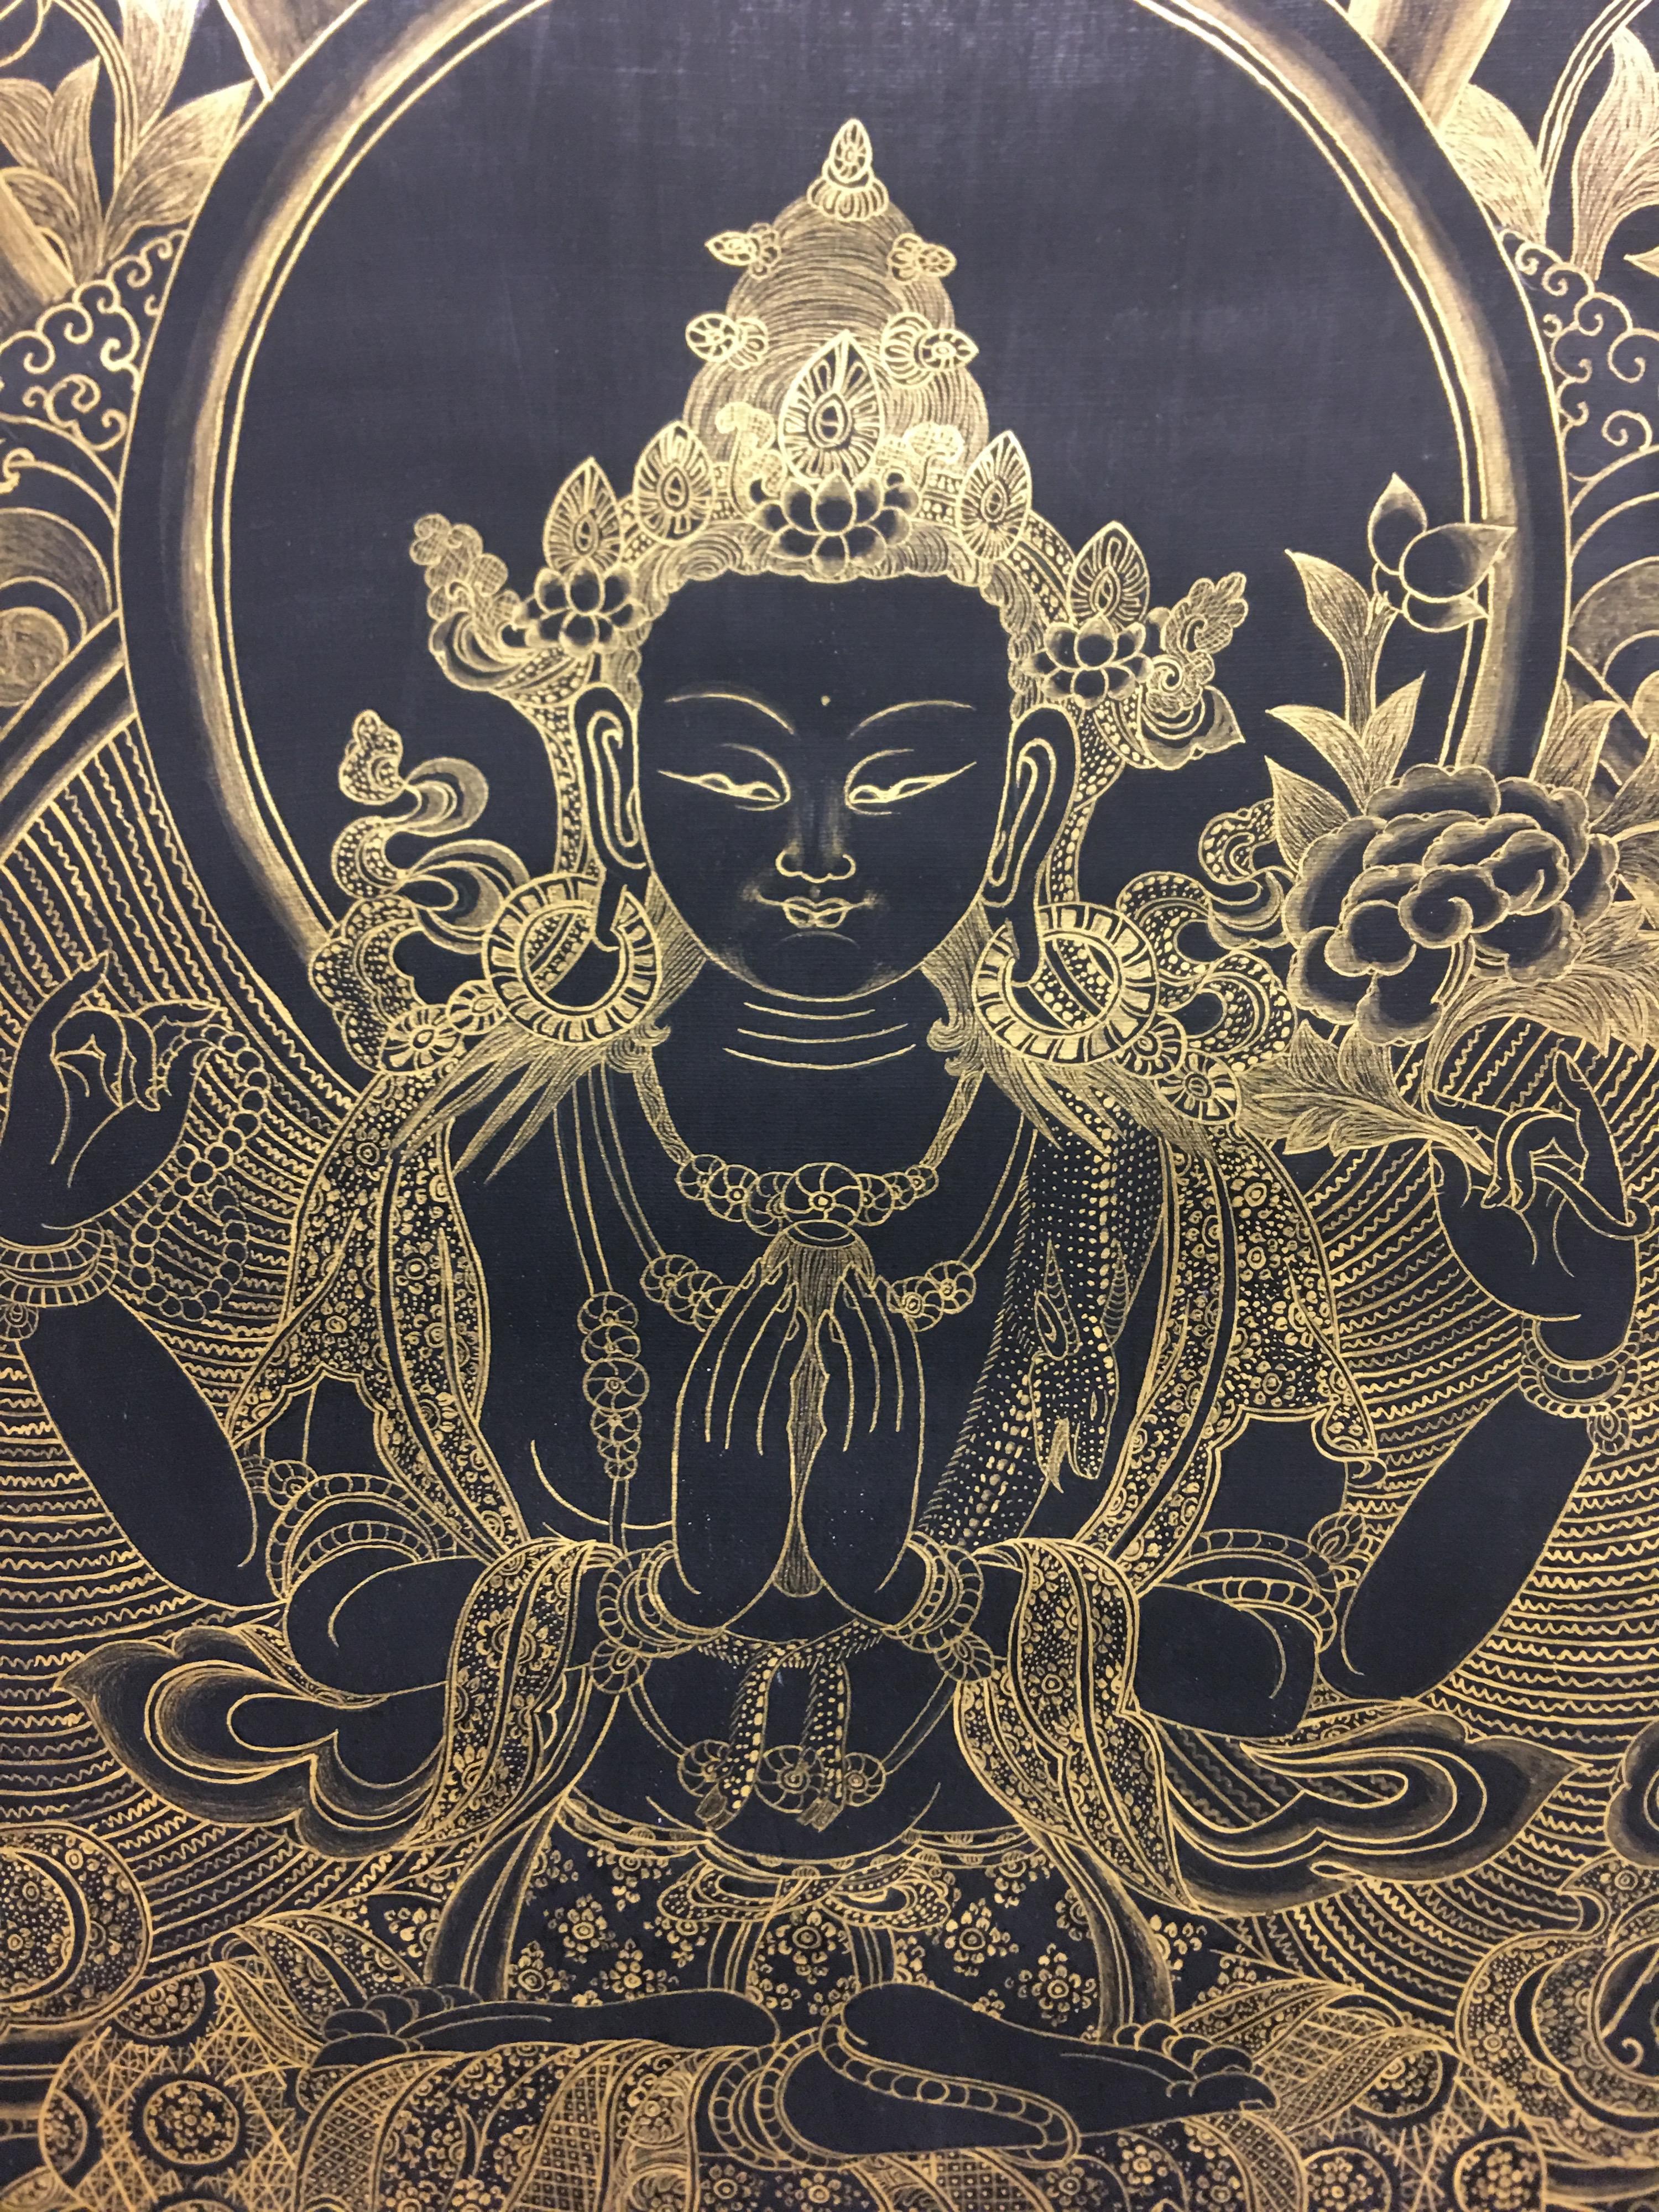 Unframed Hand Painted Chenrezig Thangka on Canvas with 24K Gold  - Painting by Unknown